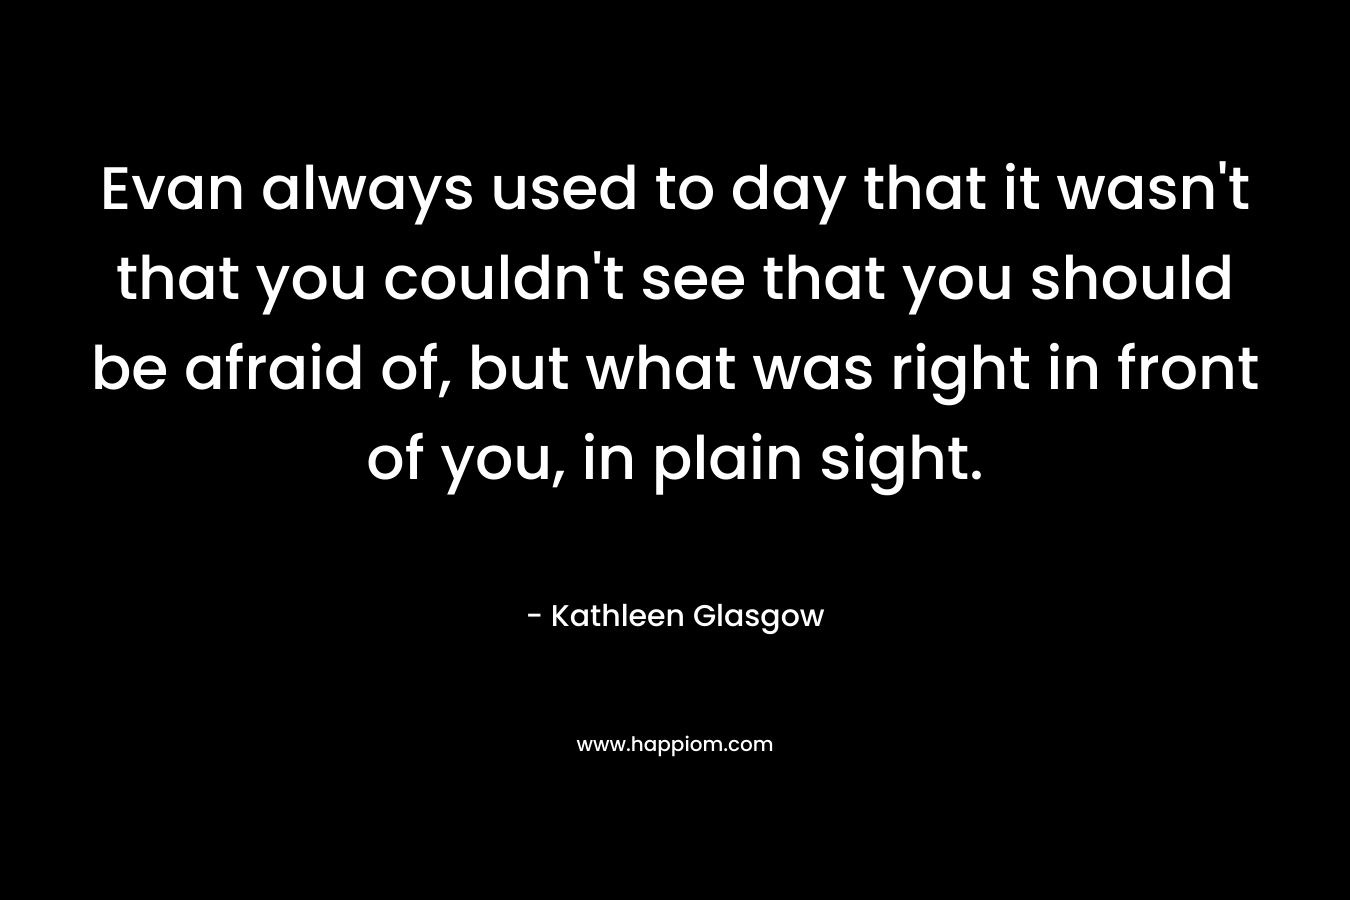 Evan always used to day that it wasn’t that you couldn’t see that you should be afraid of, but what was right in front of you, in plain sight. – Kathleen Glasgow